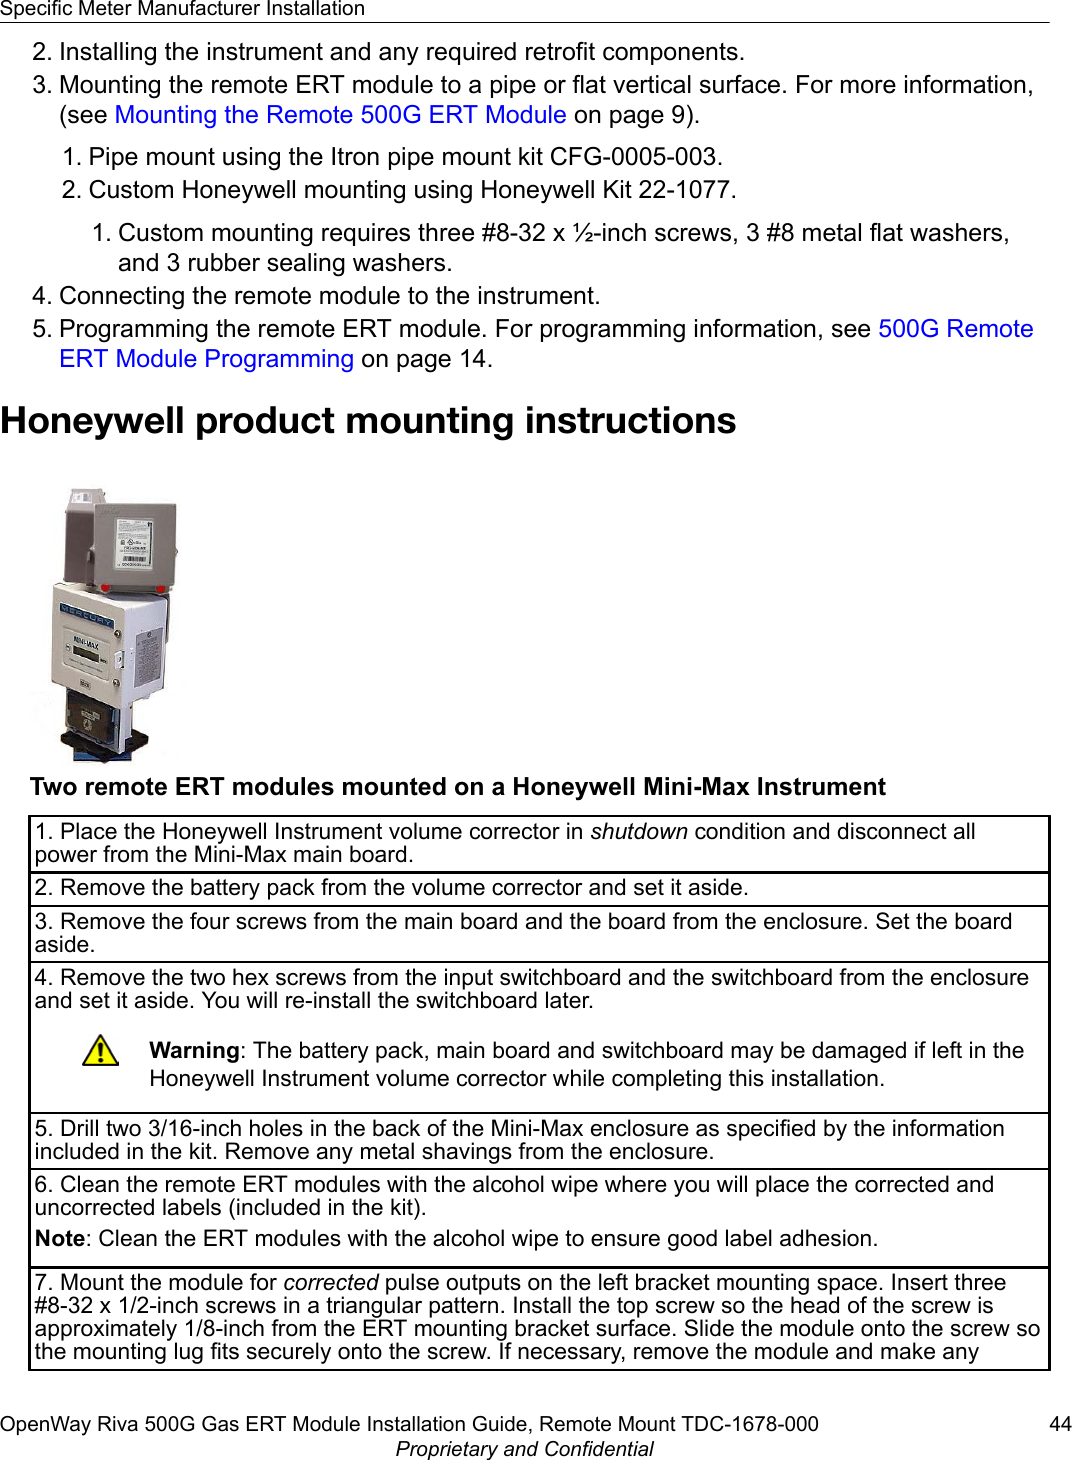 2. Installing the instrument and any required retrofit components.3. Mounting the remote ERT module to a pipe or flat vertical surface. For more information,(see Mounting the Remote 500G ERT Module on page 9).1. Pipe mount using the Itron pipe mount kit CFG-0005-003.2. Custom Honeywell mounting using Honeywell Kit 22-1077.1. Custom mounting requires three #8-32 x ½-inch screws, 3 #8 metal flat washers,and 3 rubber sealing washers.4. Connecting the remote module to the instrument.5. Programming the remote ERT module. For programming information, see 500G RemoteERT Module Programming on page 14.Honeywell product mounting instructionsTwo remote ERT modules mounted on a Honeywell Mini-Max Instrument1. Place the Honeywell Instrument volume corrector in shutdown condition and disconnect allpower from the Mini-Max main board.2. Remove the battery pack from the volume corrector and set it aside.3. Remove the four screws from the main board and the board from the enclosure. Set the boardaside.4. Remove the two hex screws from the input switchboard and the switchboard from the enclosureand set it aside. You will re-install the switchboard later.Warning: The battery pack, main board and switchboard may be damaged if left in theHoneywell Instrument volume corrector while completing this installation.5. Drill two 3/16-inch holes in the back of the Mini-Max enclosure as specified by the informationincluded in the kit. Remove any metal shavings from the enclosure.6. Clean the remote ERT modules with the alcohol wipe where you will place the corrected anduncorrected labels (included in the kit).Note: Clean the ERT modules with the alcohol wipe to ensure good label adhesion.7. Mount the module for corrected pulse outputs on the left bracket mounting space. Insert three#8-32 x 1/2-inch screws in a triangular pattern. Install the top screw so the head of the screw isapproximately 1/8-inch from the ERT mounting bracket surface. Slide the module onto the screw sothe mounting lug fits securely onto the screw. If necessary, remove the module and make anySpecific Meter Manufacturer InstallationOpenWay Riva 500G Gas ERT Module Installation Guide, Remote Mount TDC-1678-000 44Proprietary and Confidential